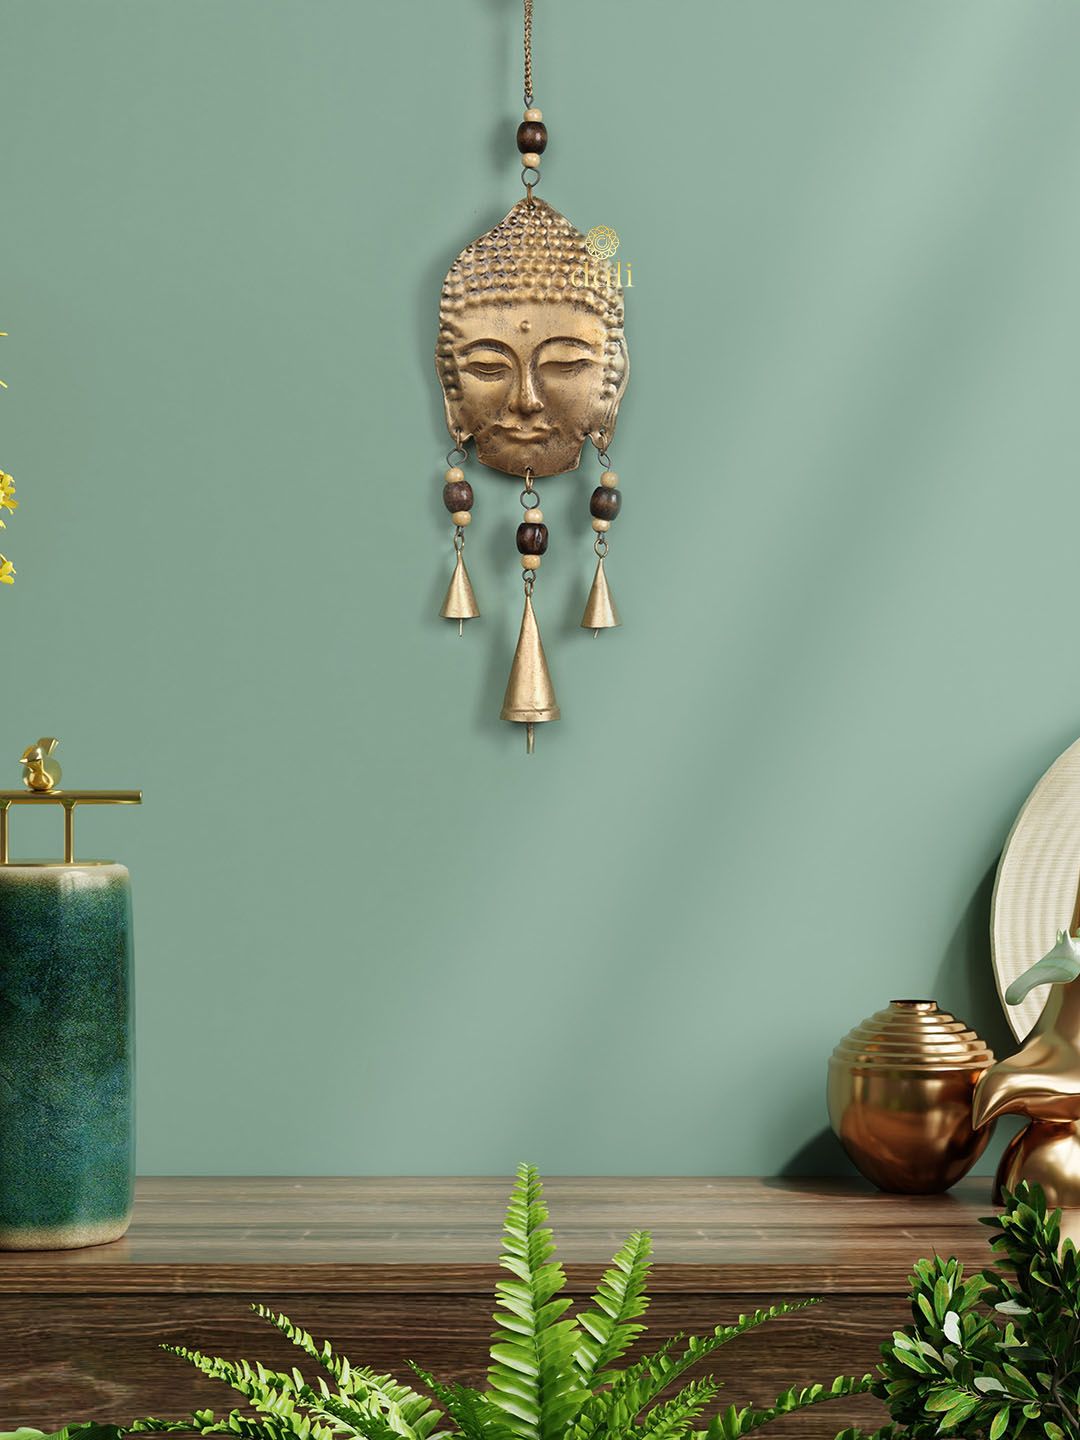 DULI Gold-Toned Buddha Design Wall Hanging Windchime With Bells Price in India